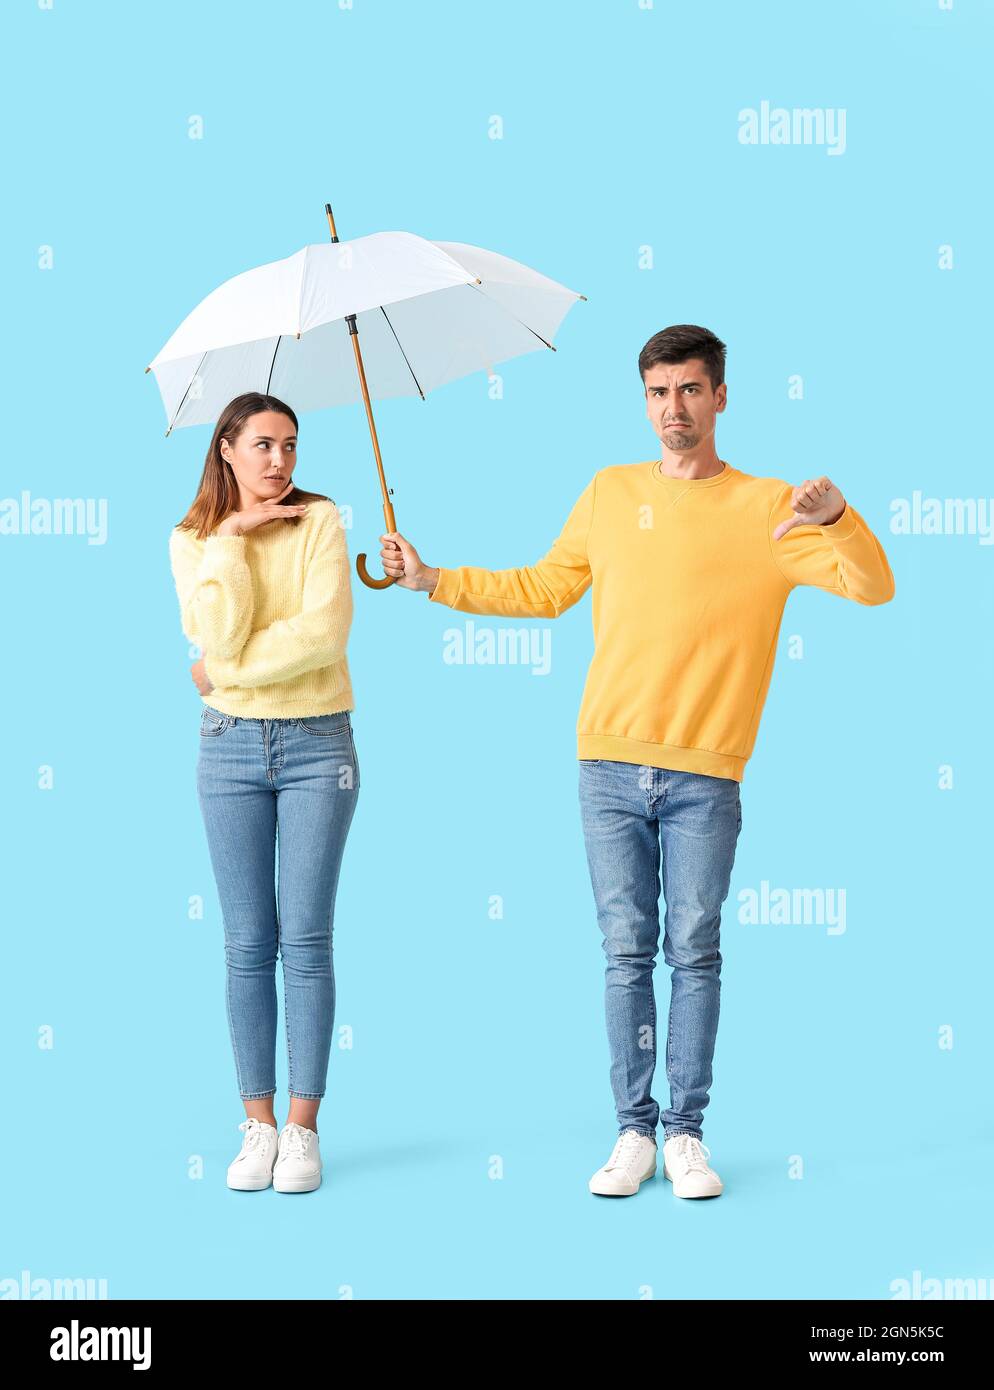 Displeased guy sharing umbrella with young woman on color background Stock Photo